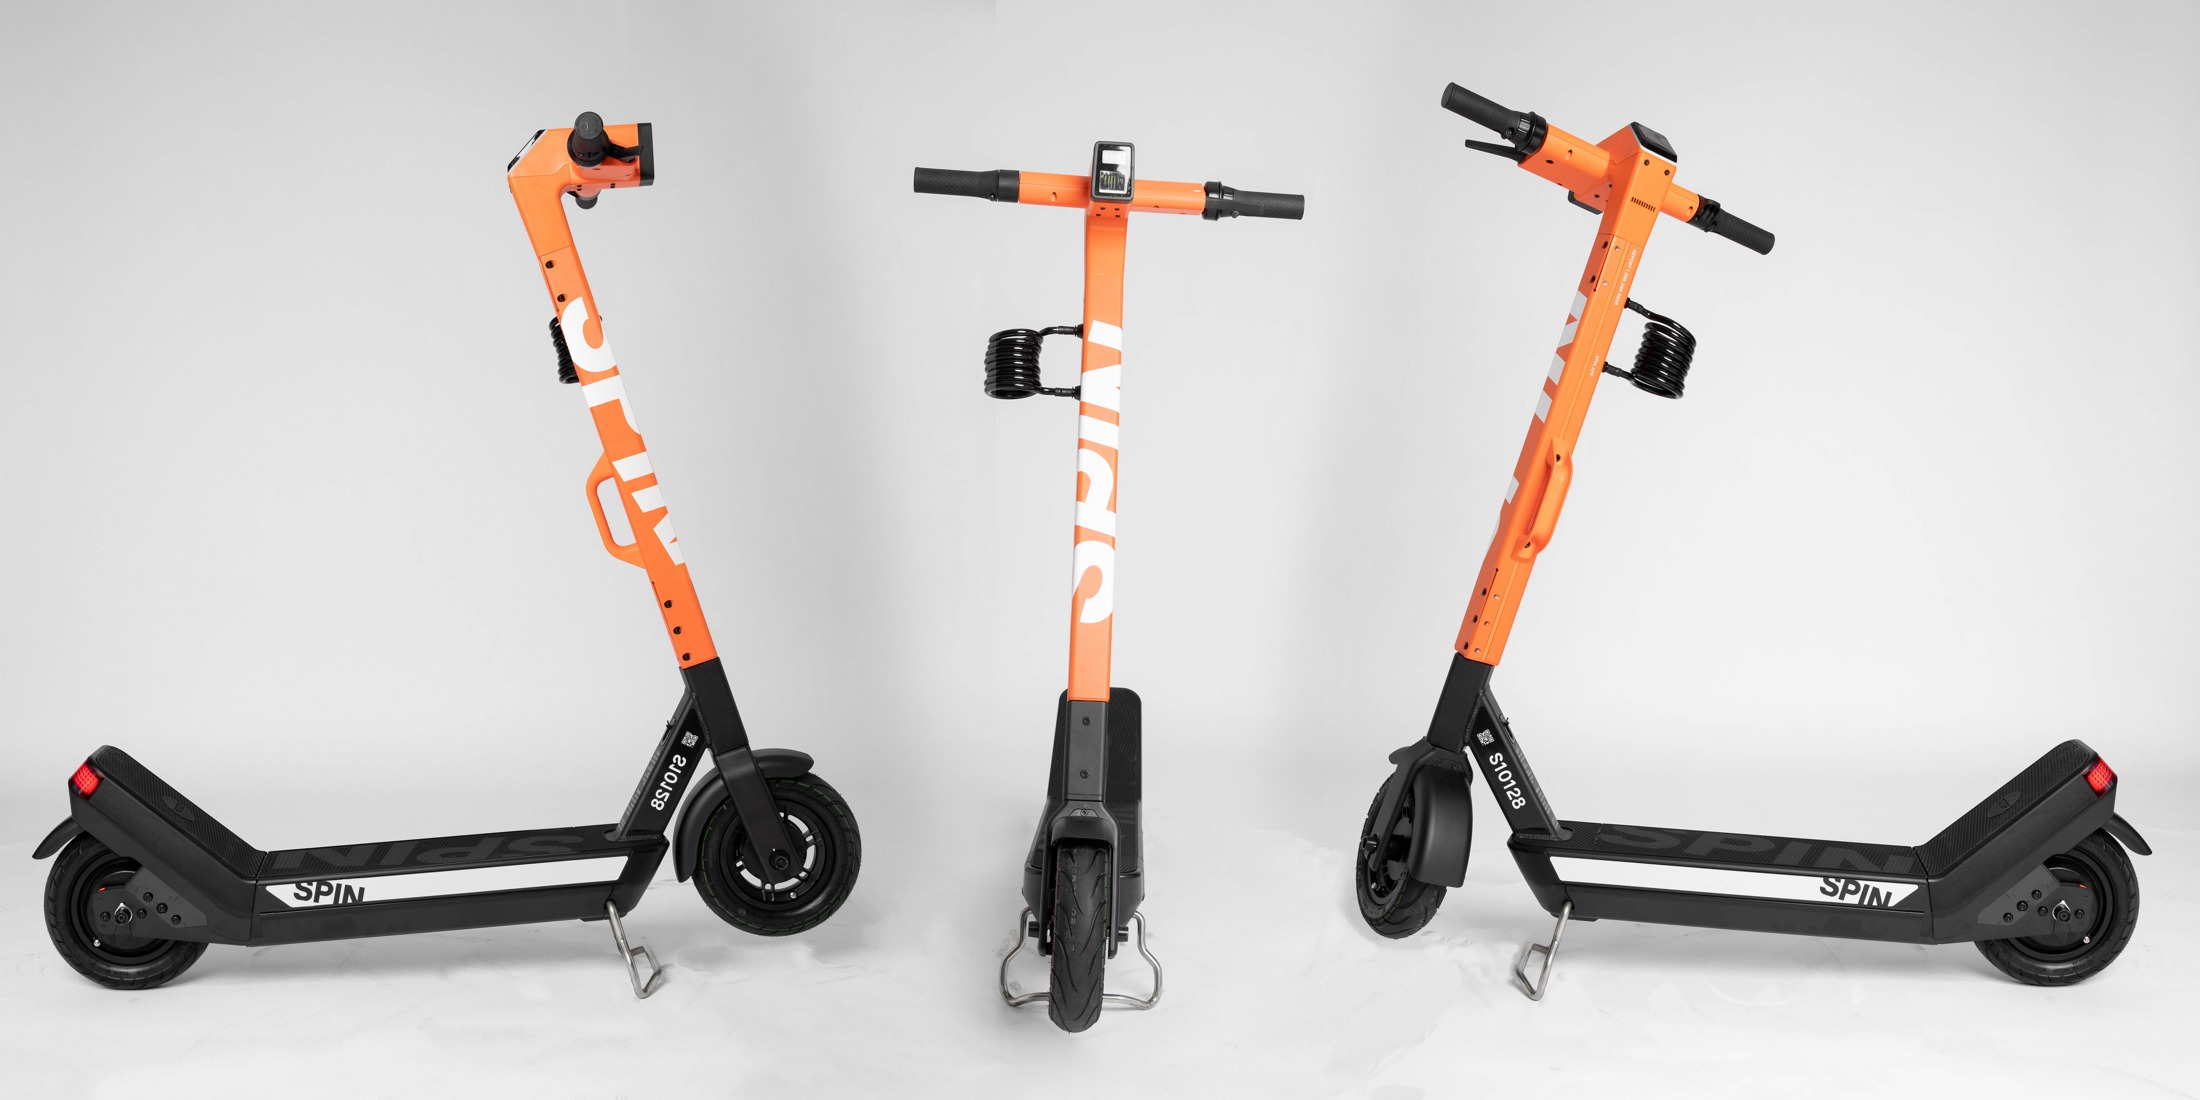 Spin's 'tough' electric scooter looks like a beast |